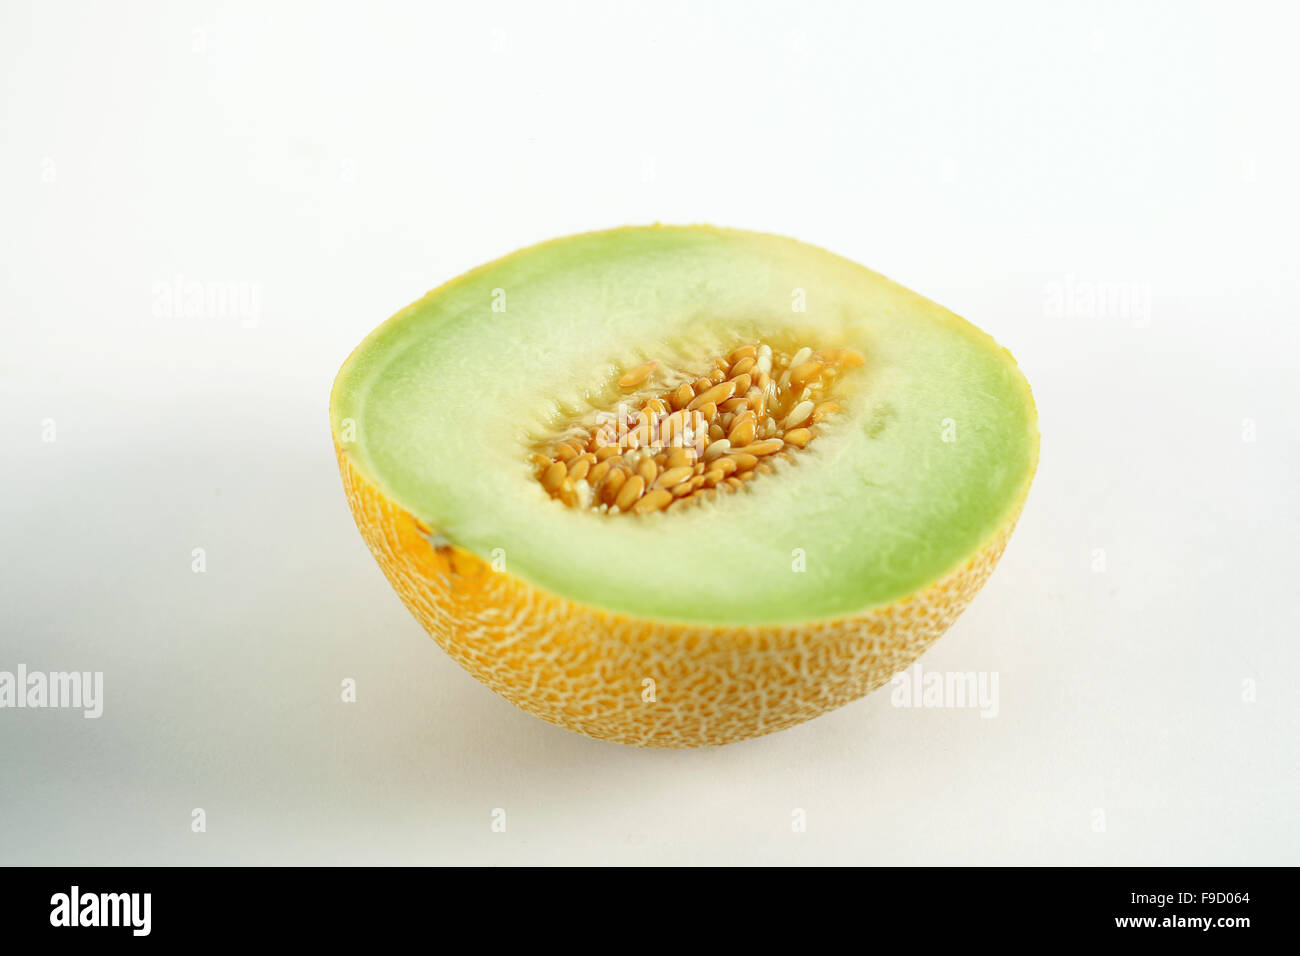 White green yellow melon Full and Sliced Cantaloupe Isolated on White Background Stock Photo